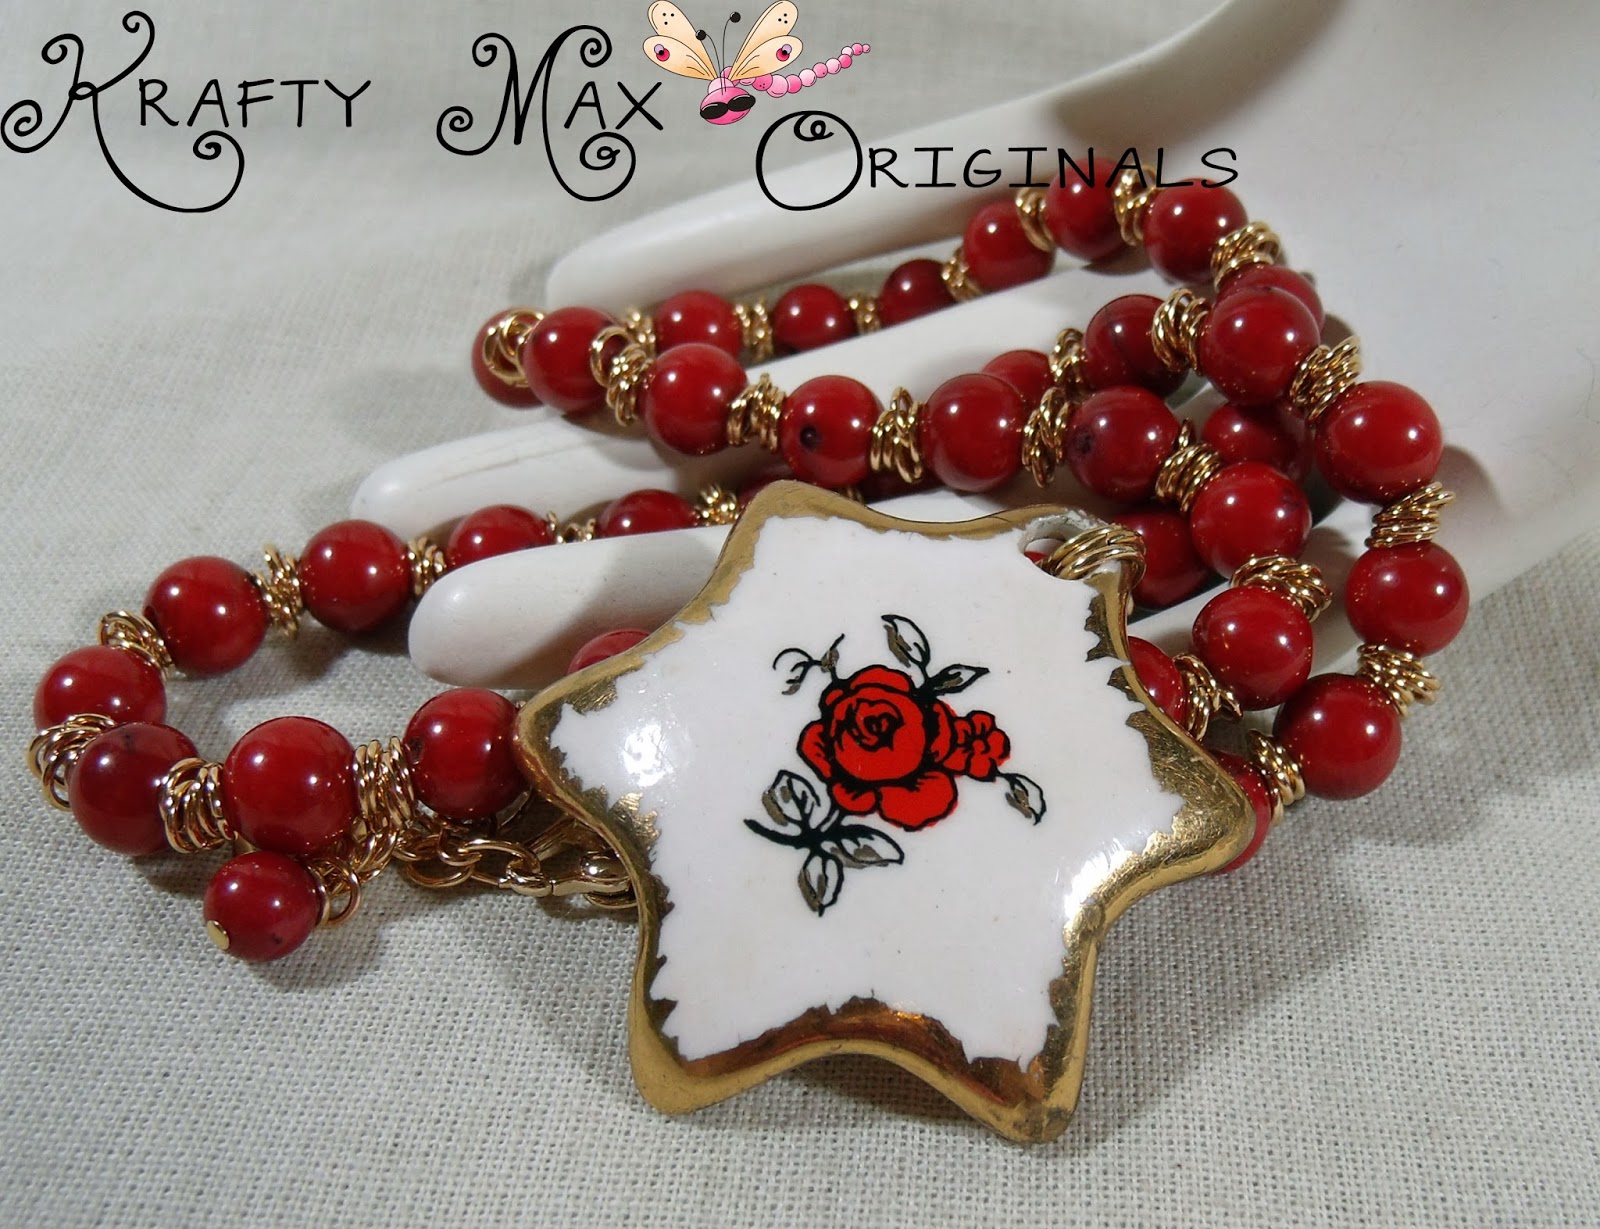 http://www.lajuliet.com/index.php/2013-01-04-15-21-51/ad/gemstone,92/exclusive-beautiful-vintage-red-ceramic-star-necklace-set-from-my-grandmother-s-stash-a-krafty-max-original-design,126